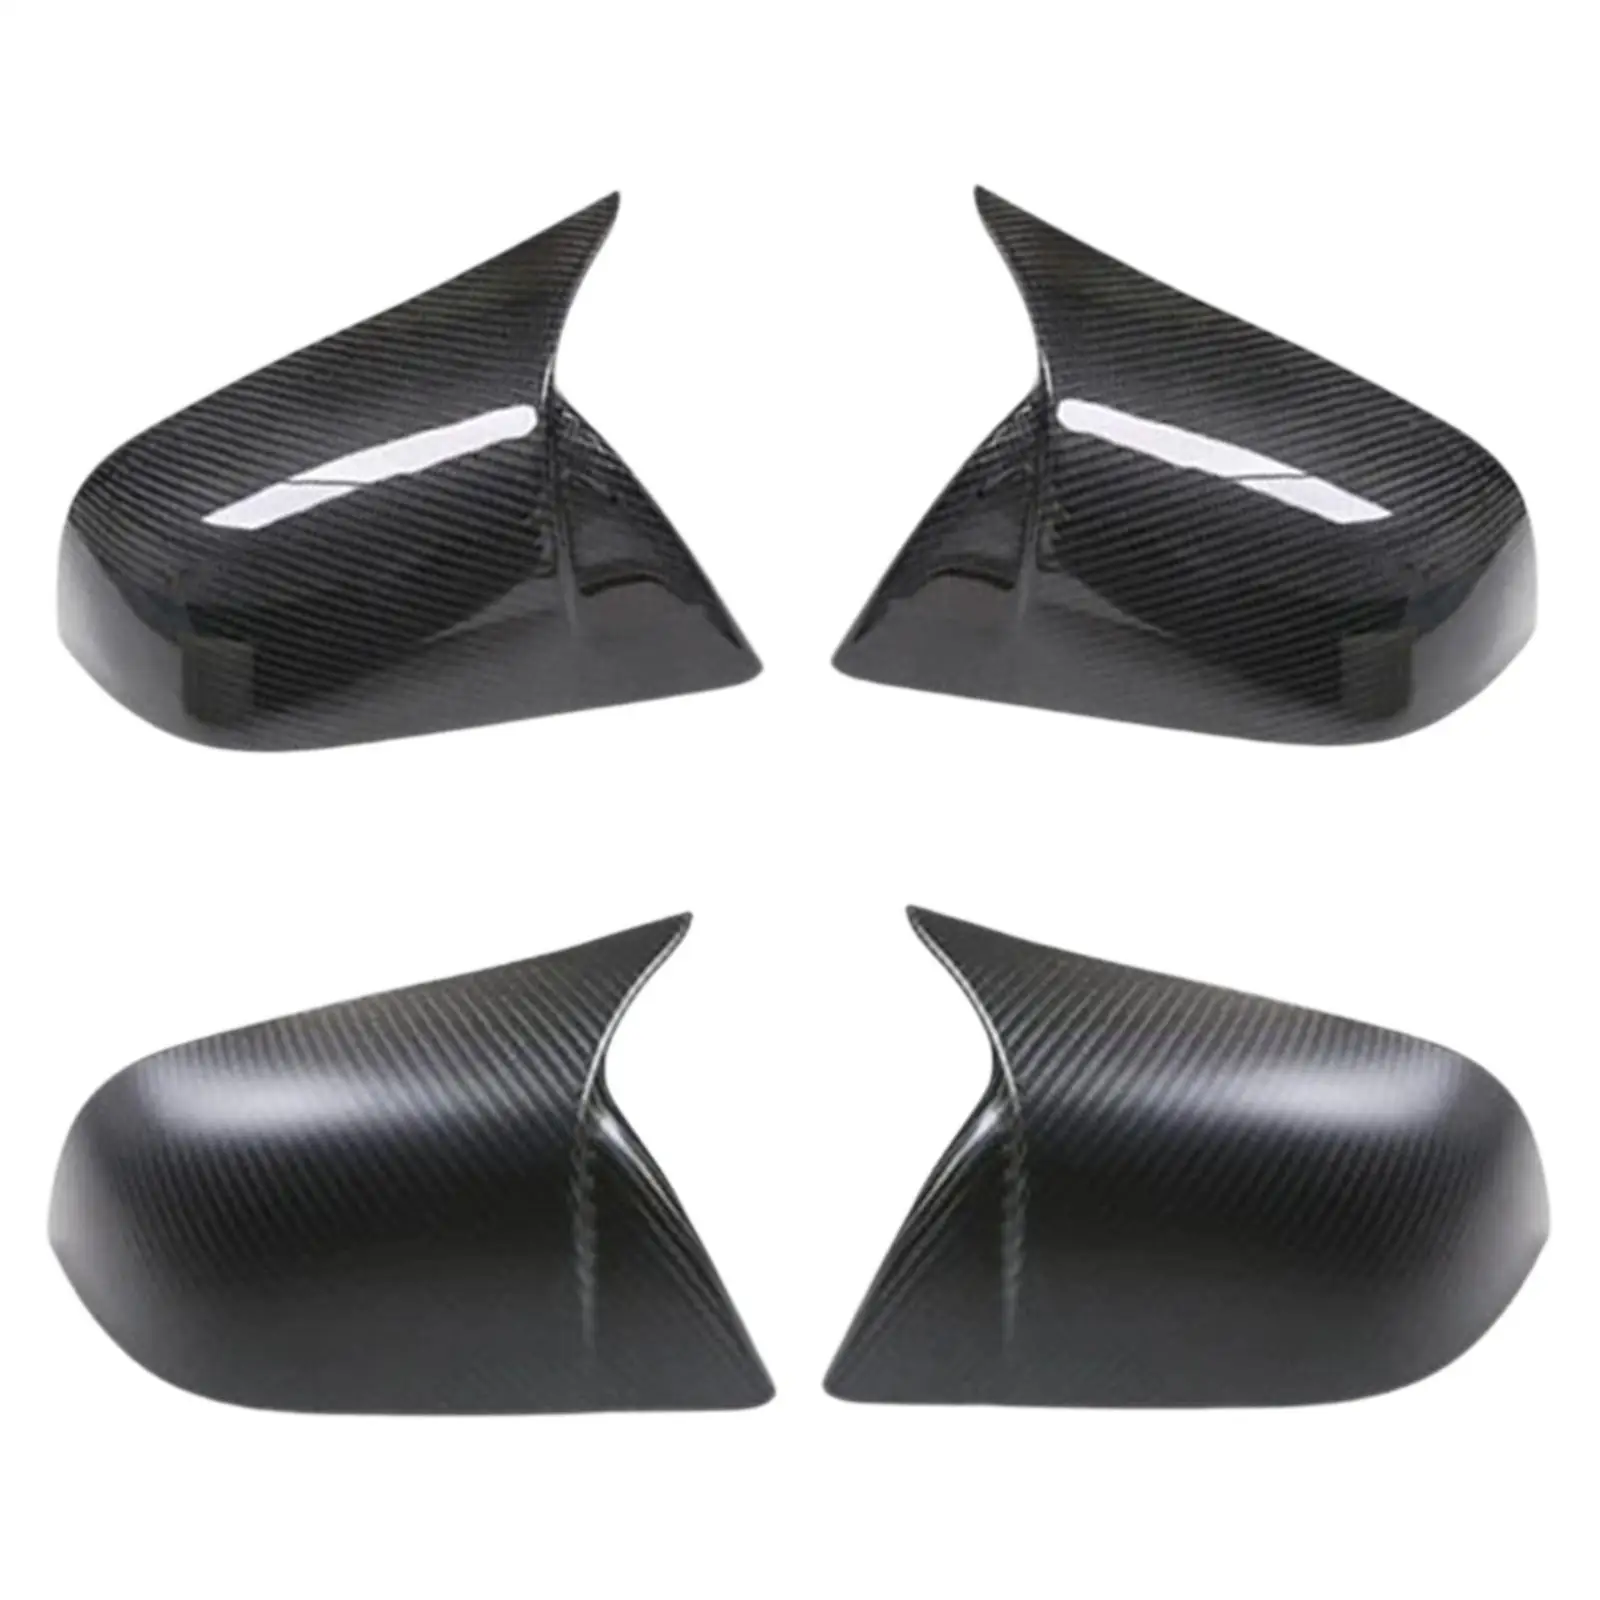 

2x Directly Replace Car Mirror Housing Premium Sturdy Side View Mirror Covers Door Side Mirror Protector for Tesla Model 3